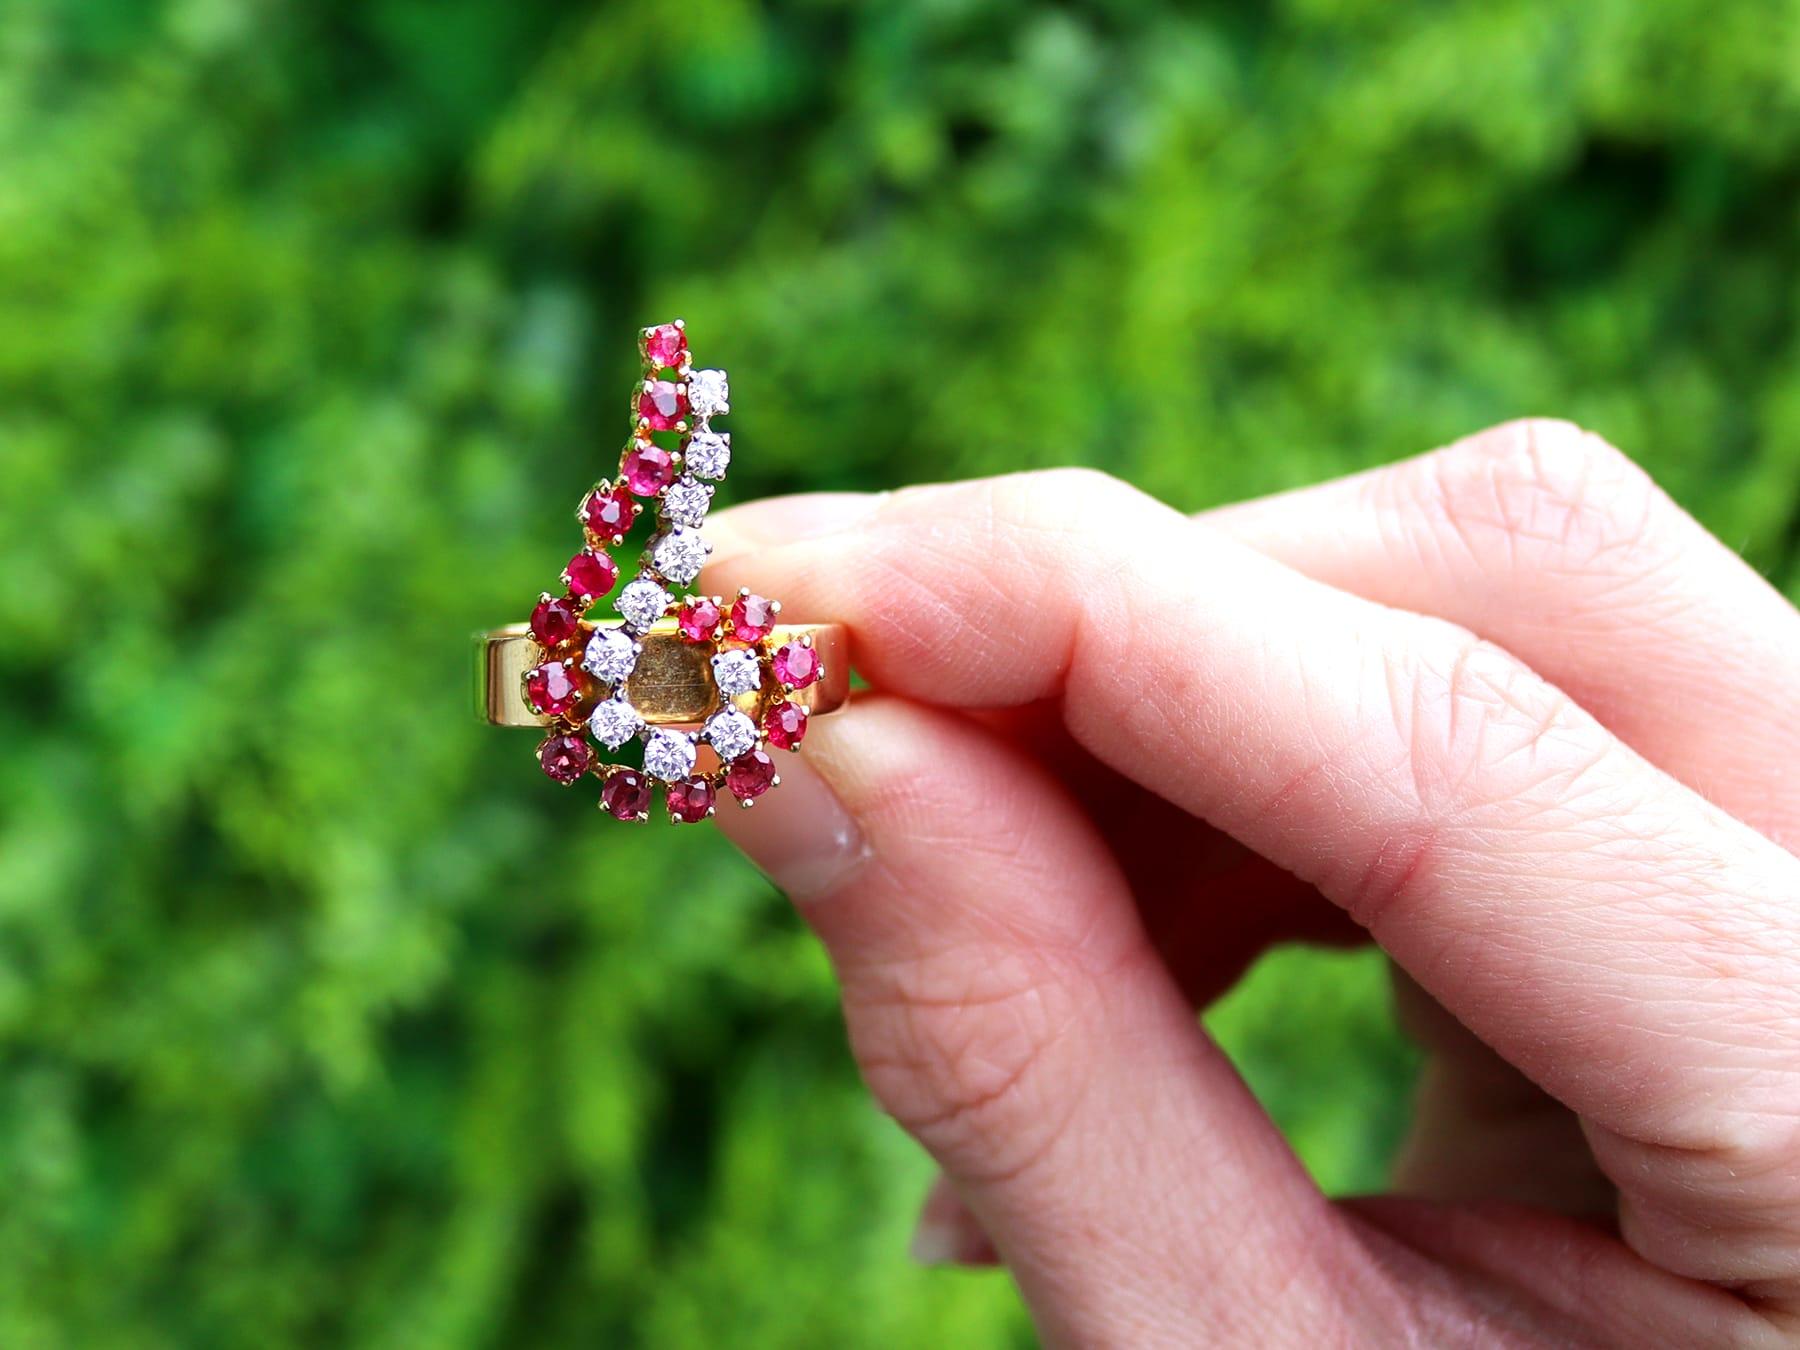 A fine and impressive vintage 1.30 carat ruby and 0.39 carat diamond, 18 karat yellow gold, 18 karat white gold set dress ring; part of our vintage ruby jewellery collections.

This fine vintage ring has been crafted in 18k yellow gold with an 18k